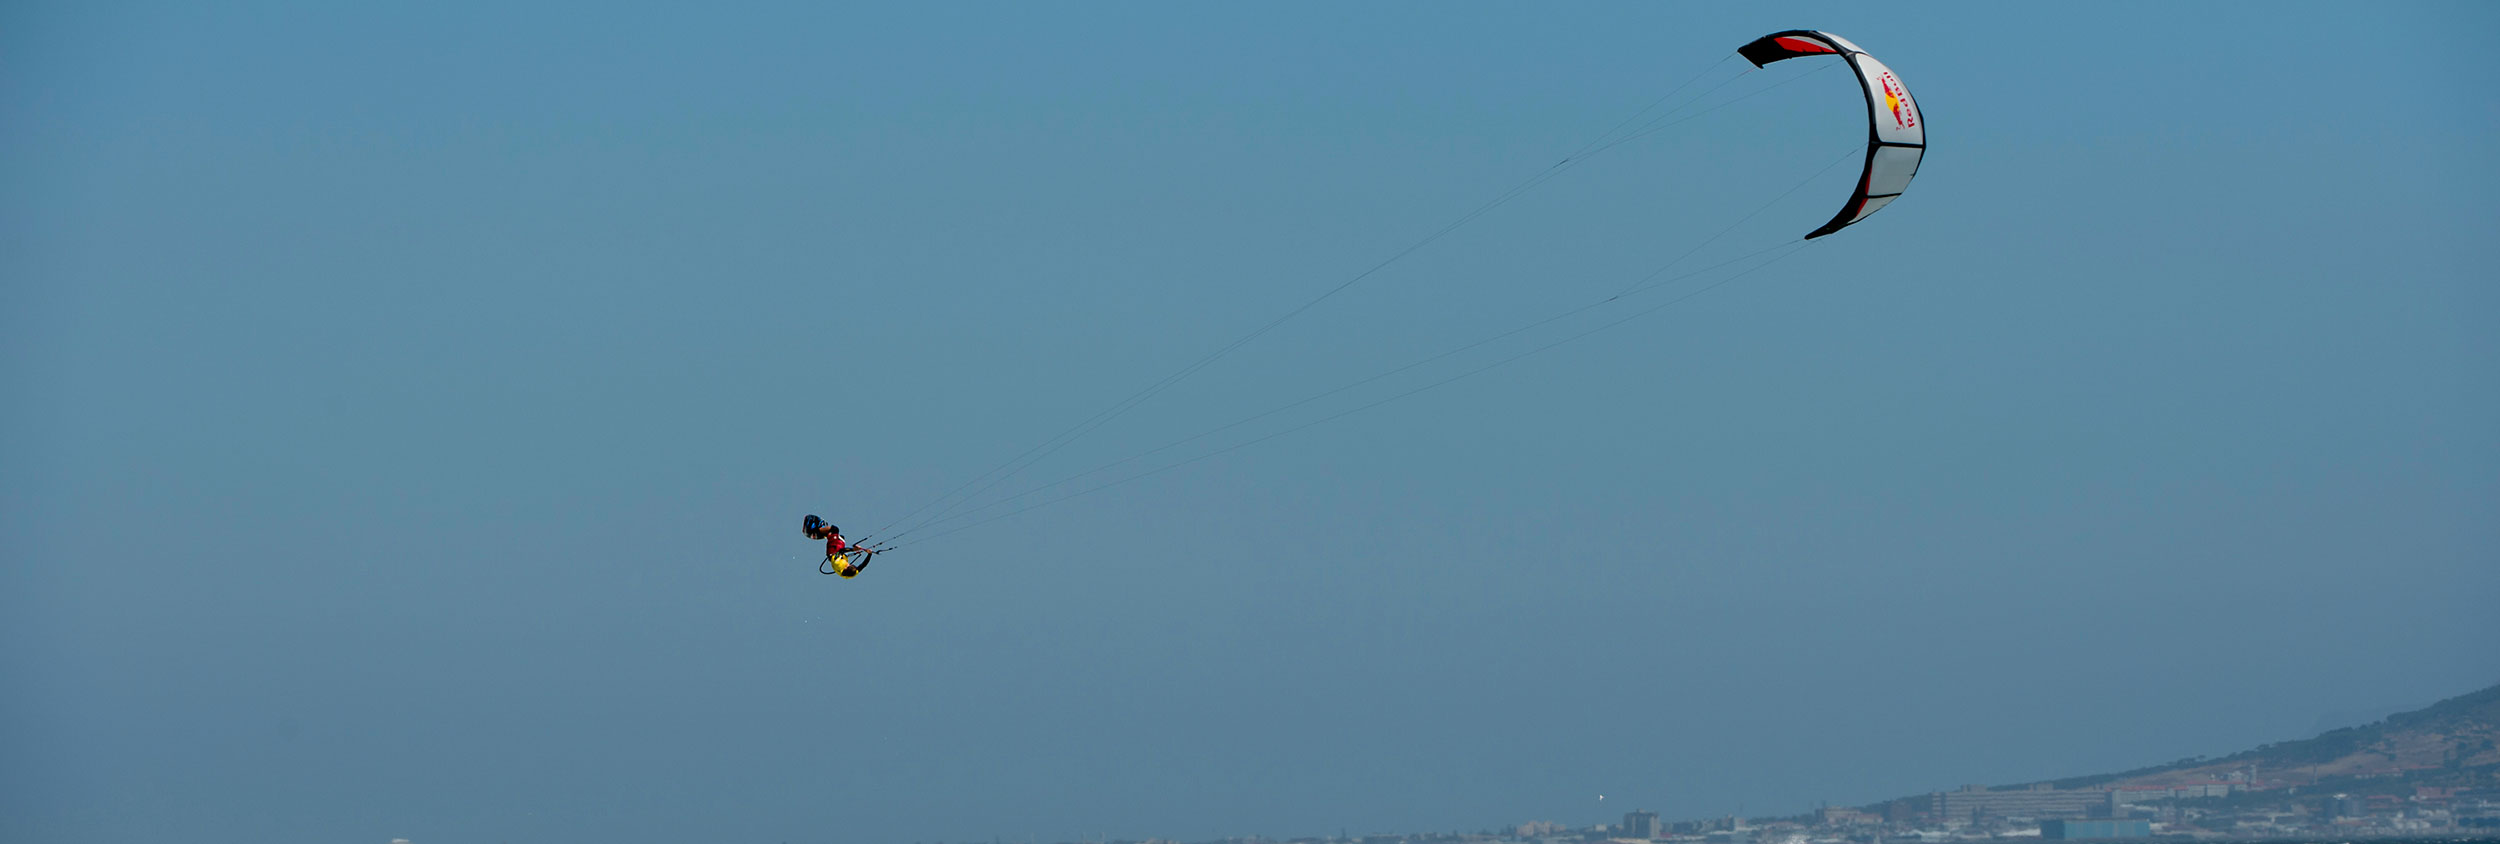 Aaron Hadlow mega loop late back roll during Red Bull King of the Air 2014